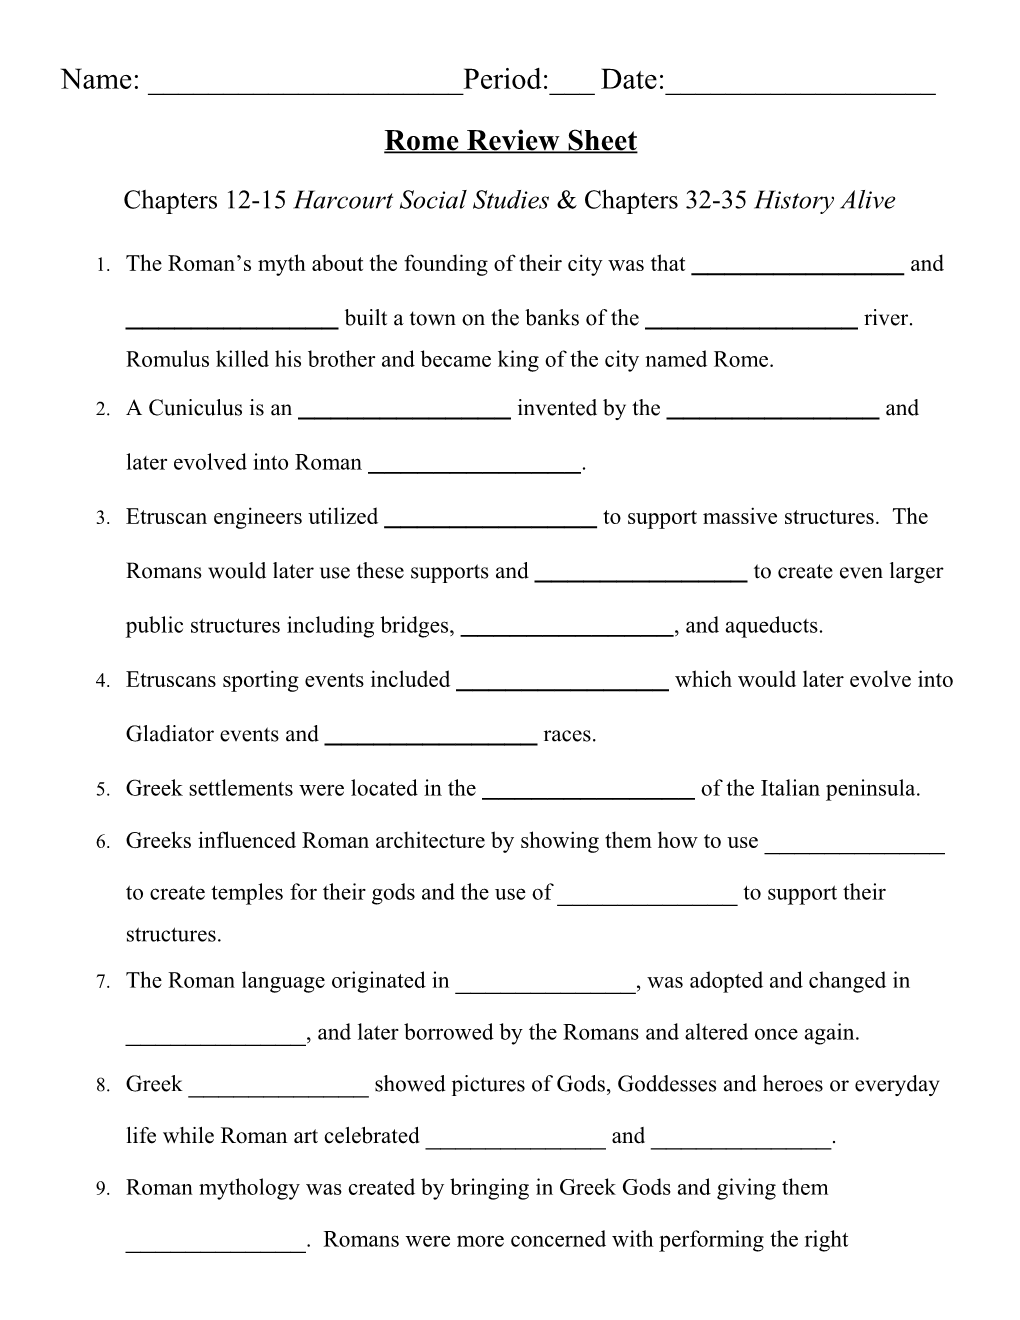 Chapters 12-15 Harcourt Social Studies & Chapters 32-35 History Alive